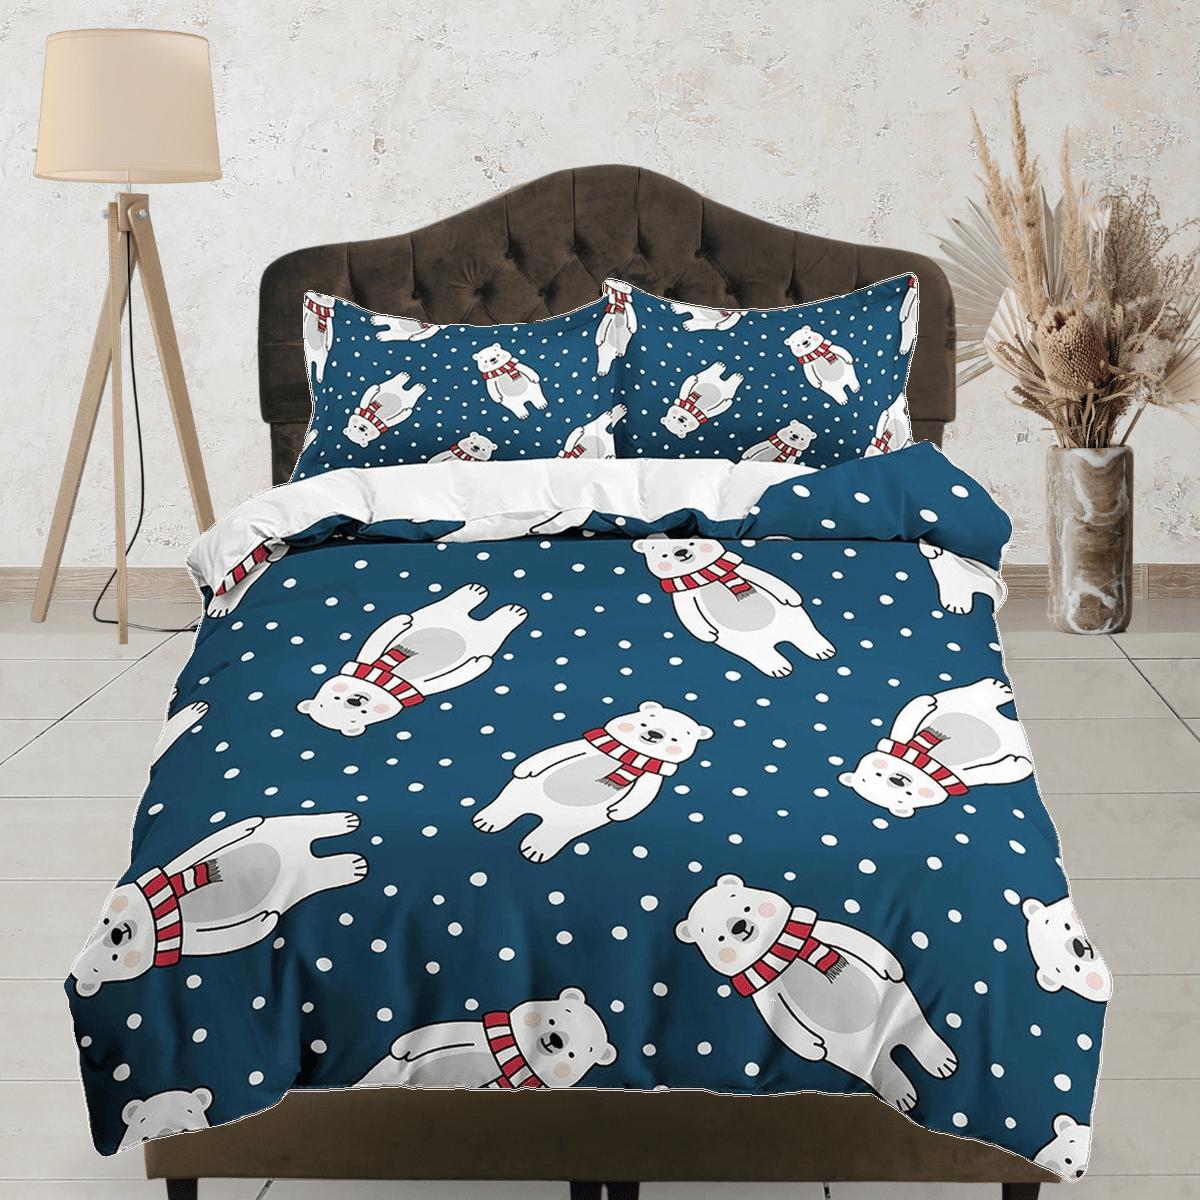 Flying Teddy Bear and Dog in Airplane Bedding, Duvet Cover Set, Zipper